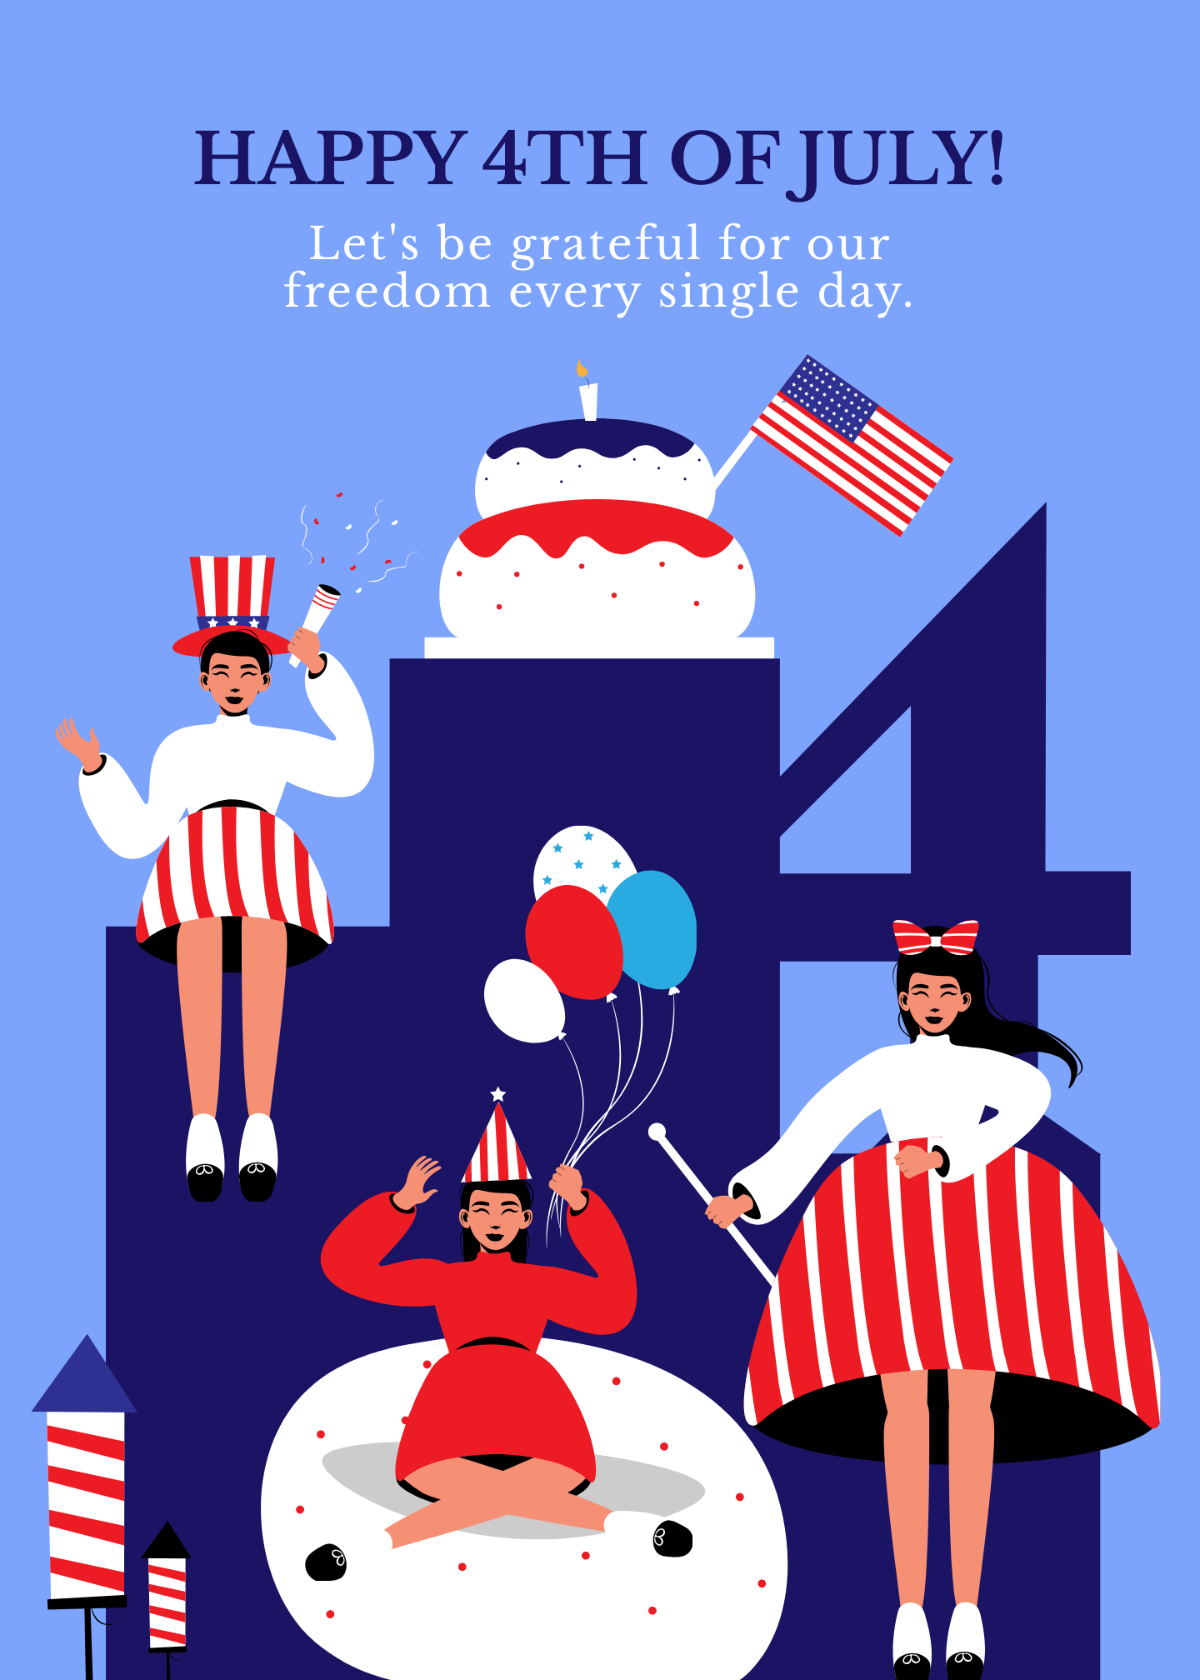 4th of July Greeting Card Template